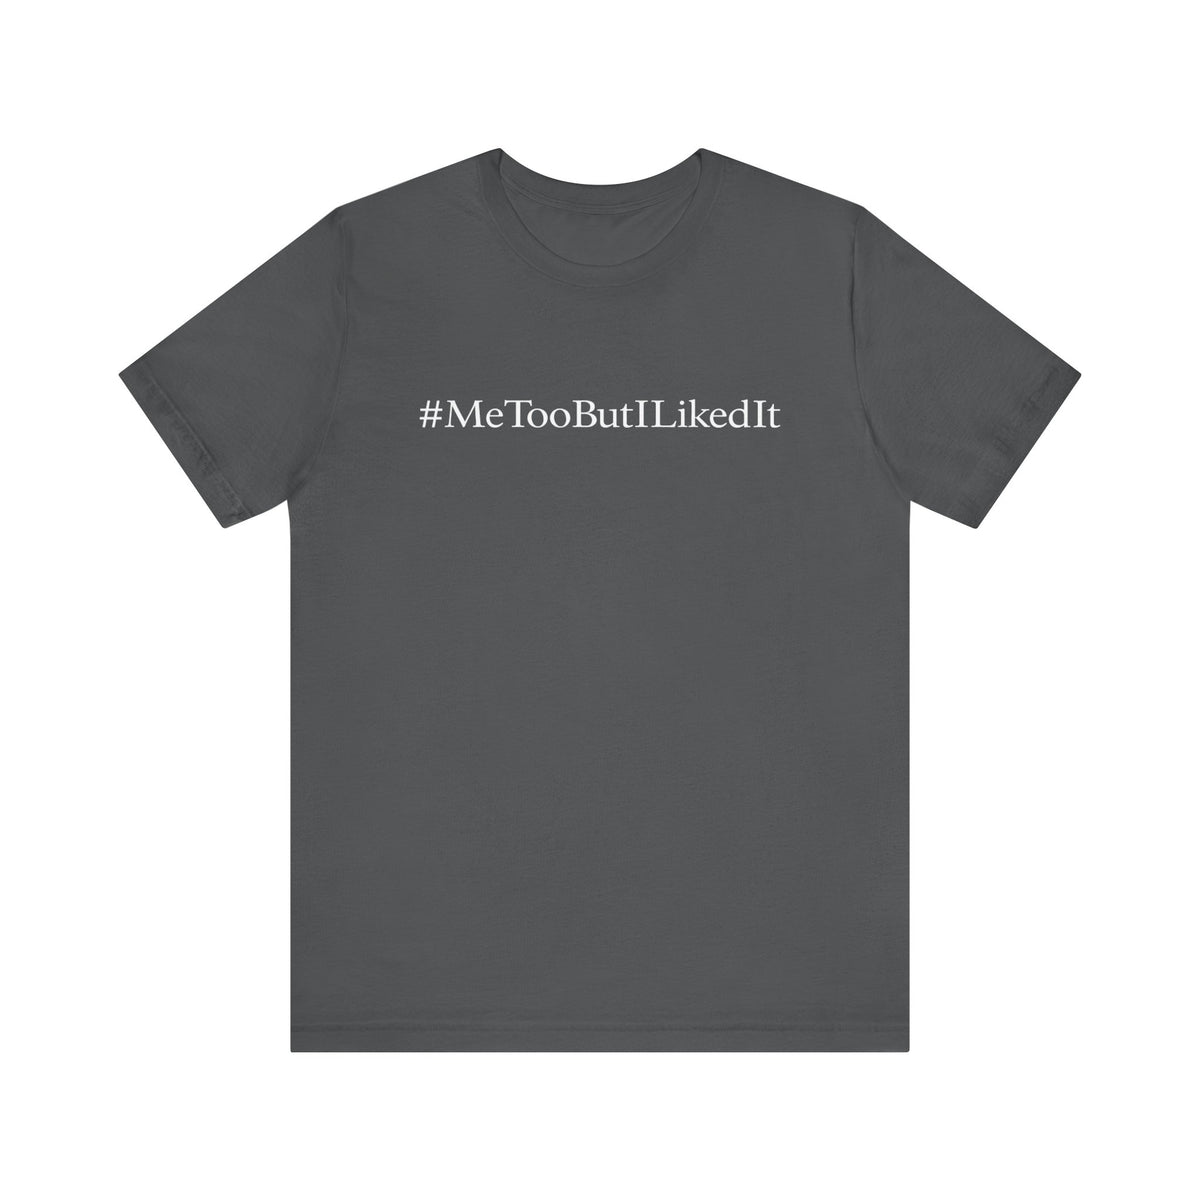 (Hashtag)Me Too But I Liked It - Men's T-Shirt